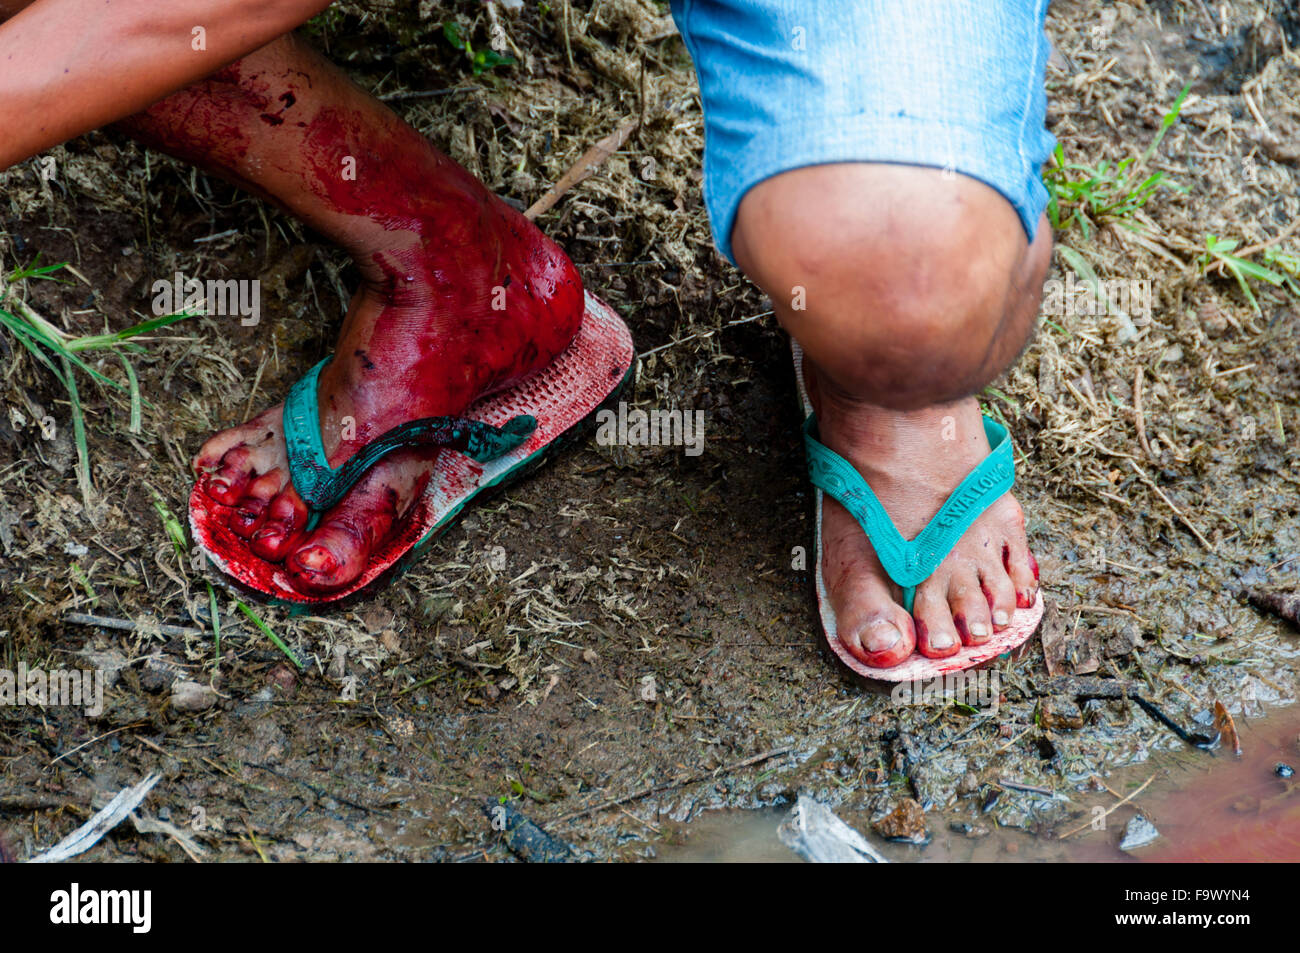 Man in flip flop shoes full of blood during a traditional funeral, Tana  Toraja Stock Photo - Alamy